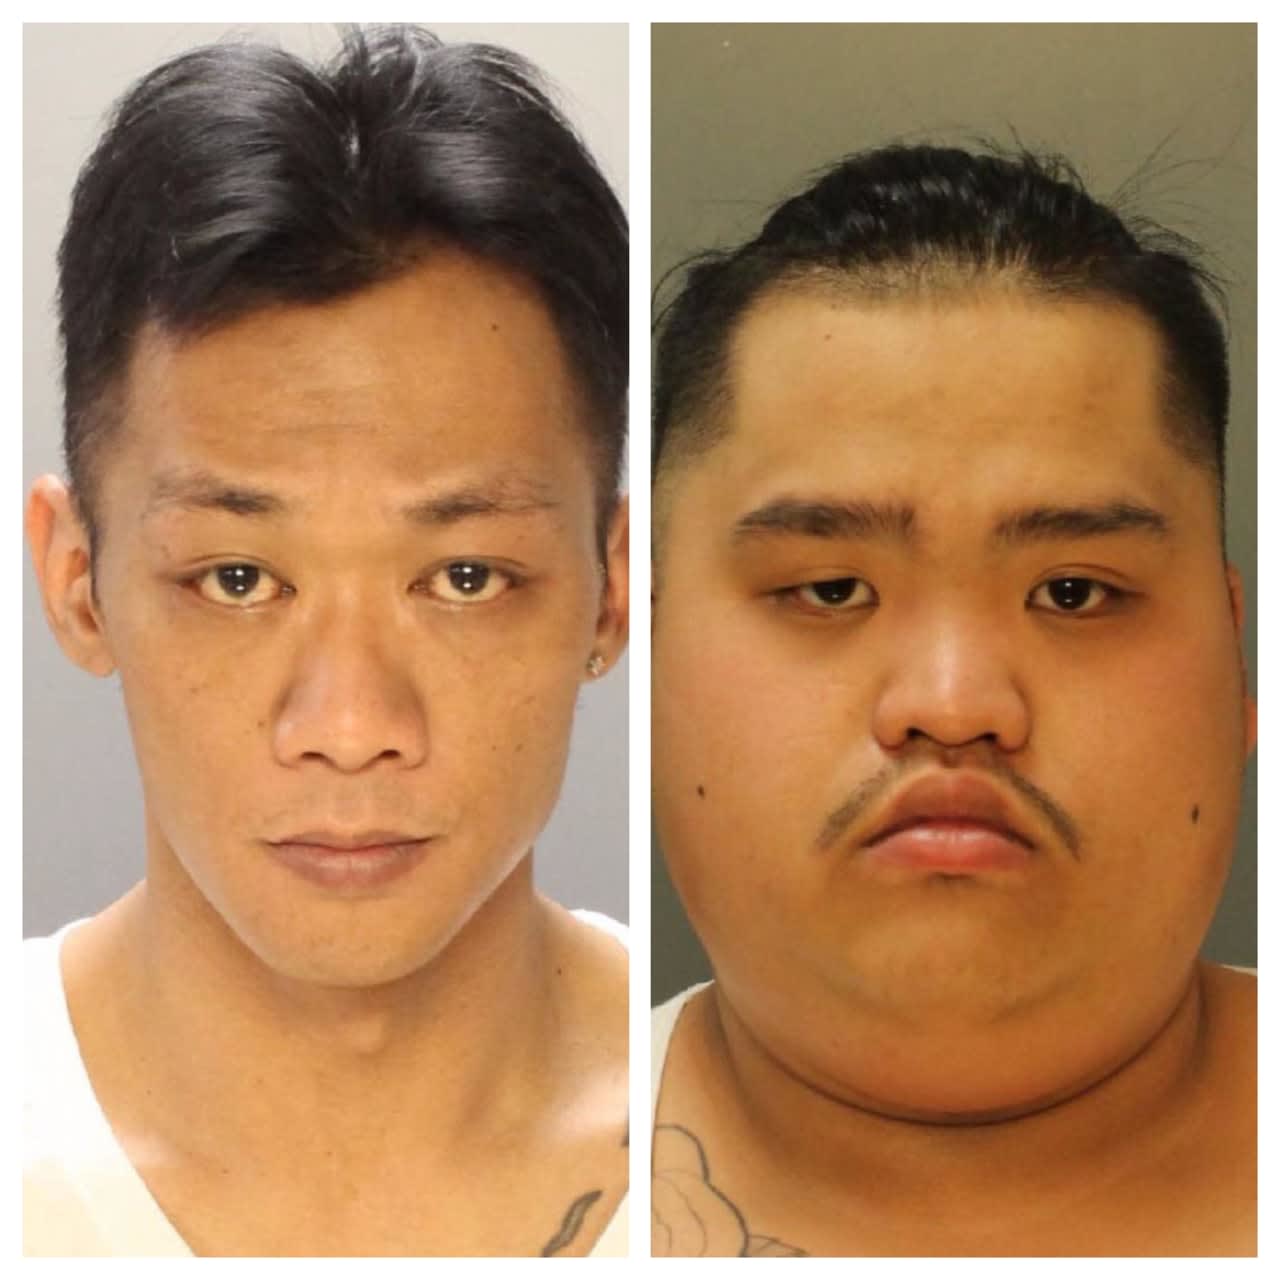 (L-R): John To, 36, and Andy Nguyen, 23